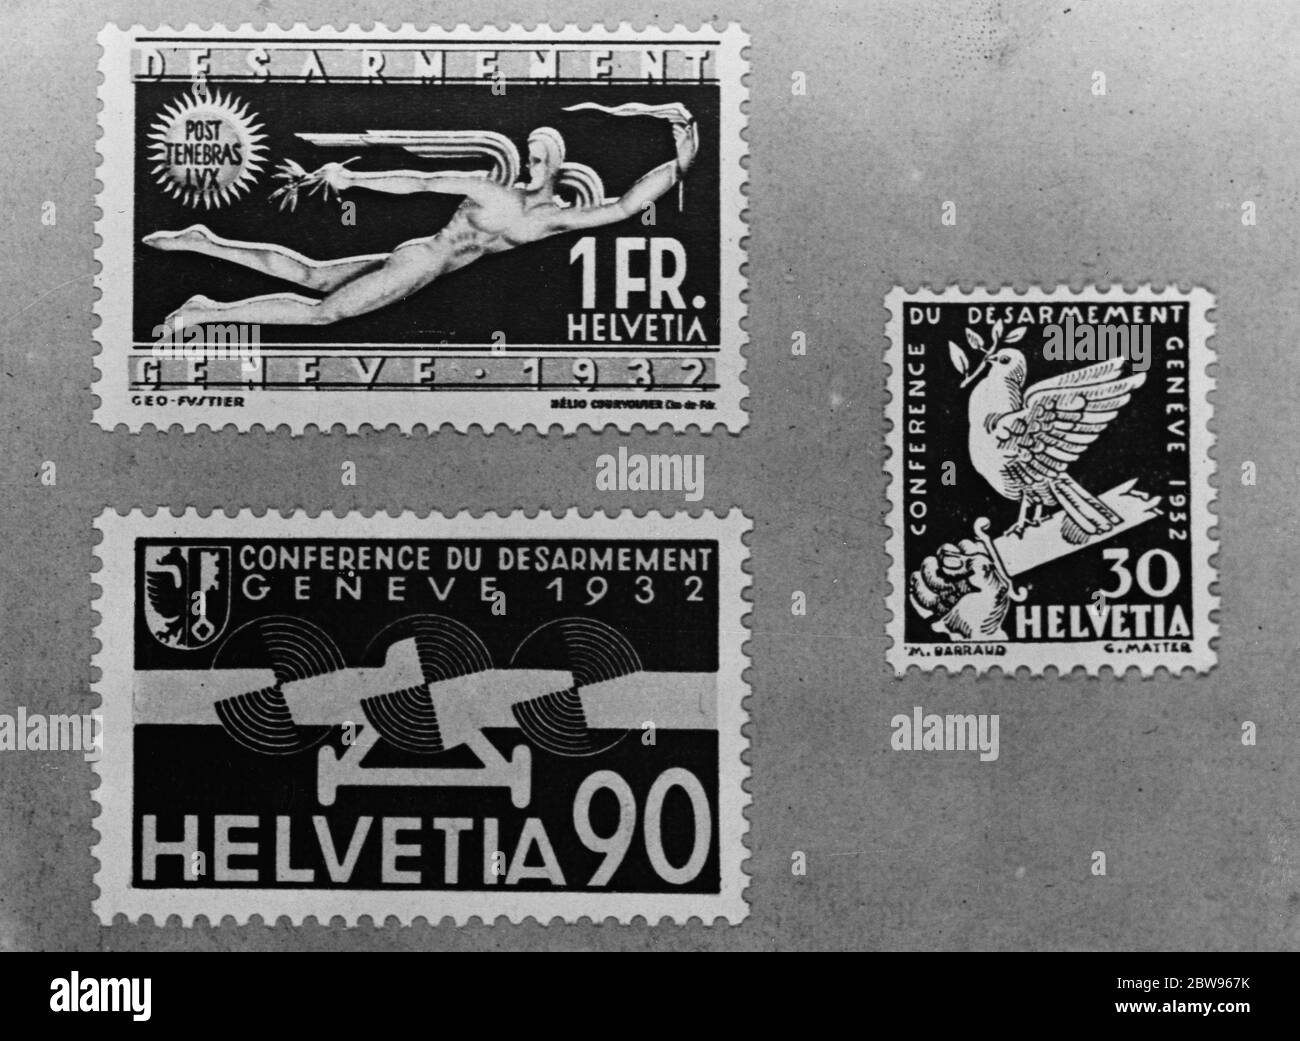 Switzerland issues special stamps for the disarmament conference . A special series of postage stamps were issued by Switzerland for the World disarmament conference at Geneva . Some of the new disarmament postage stamps . 9 February 1932 Stock Photo